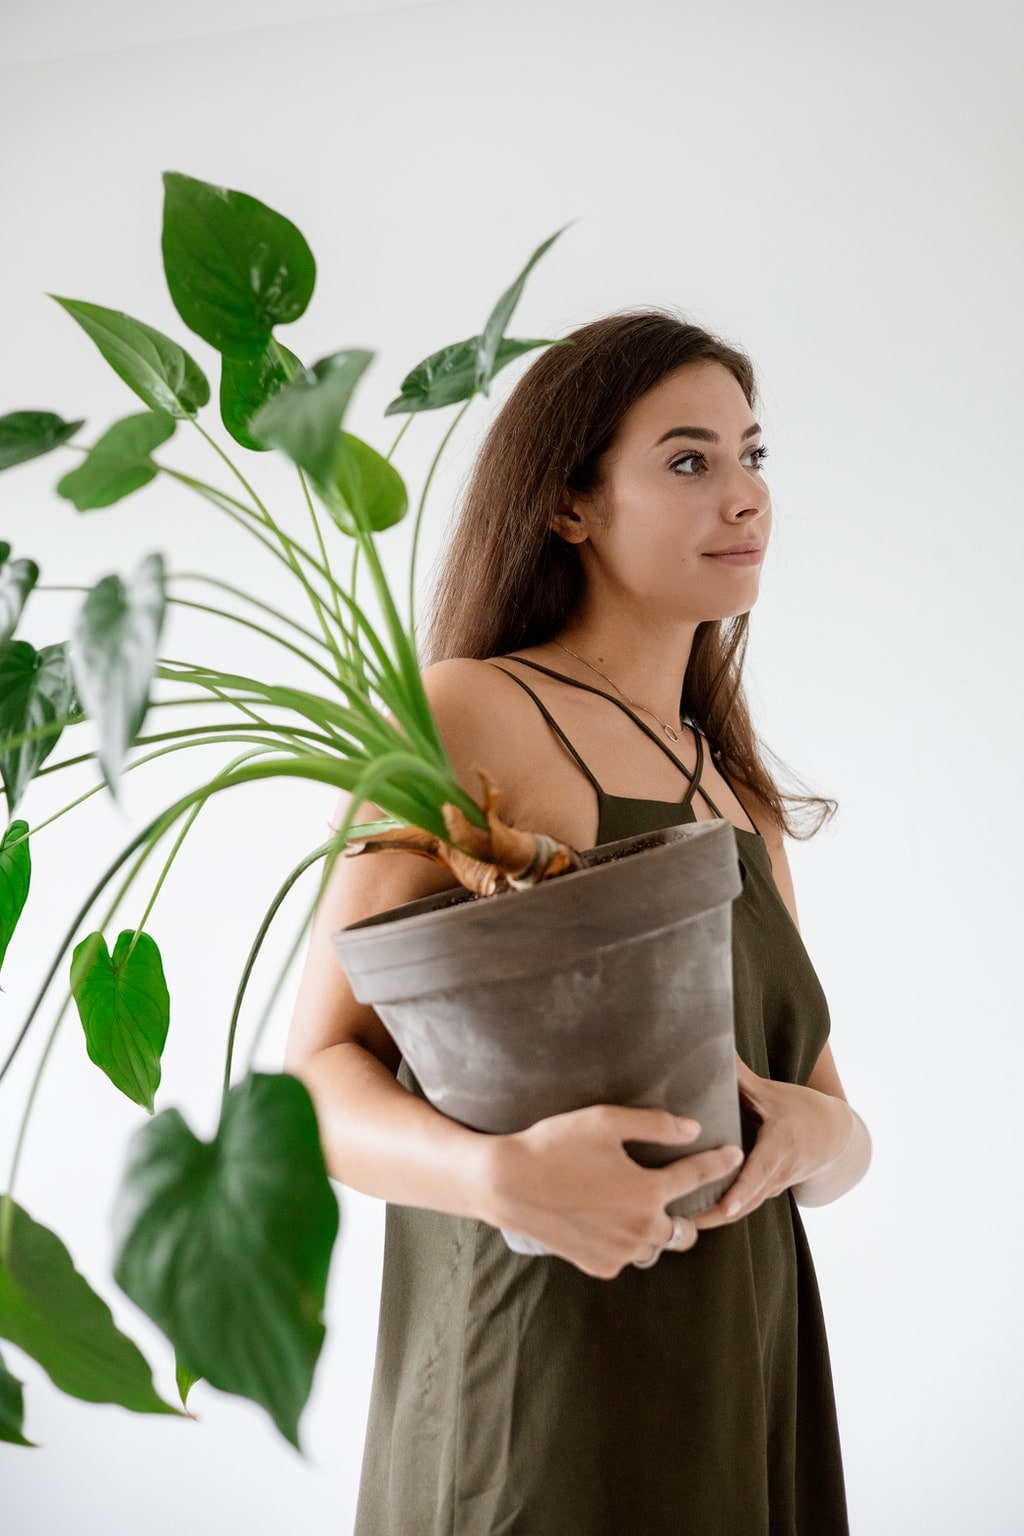 A woman carrying a plant.